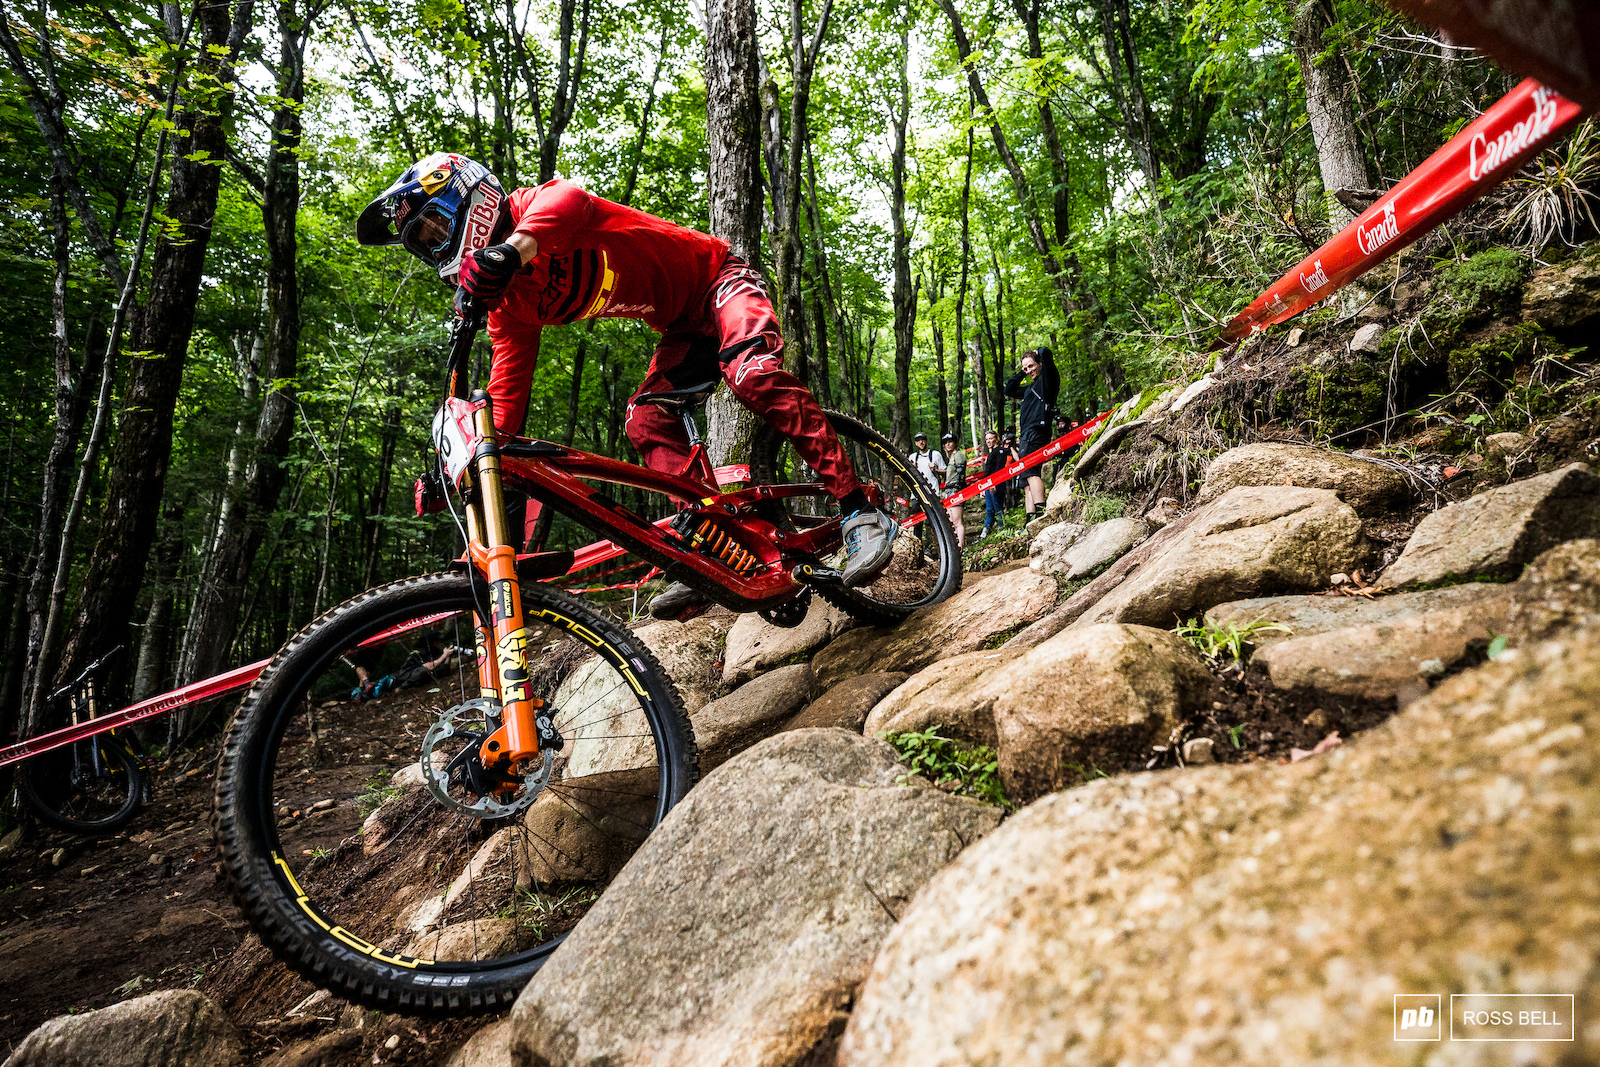 Martin Maes gets to grips with the slippy rocks in the woods.